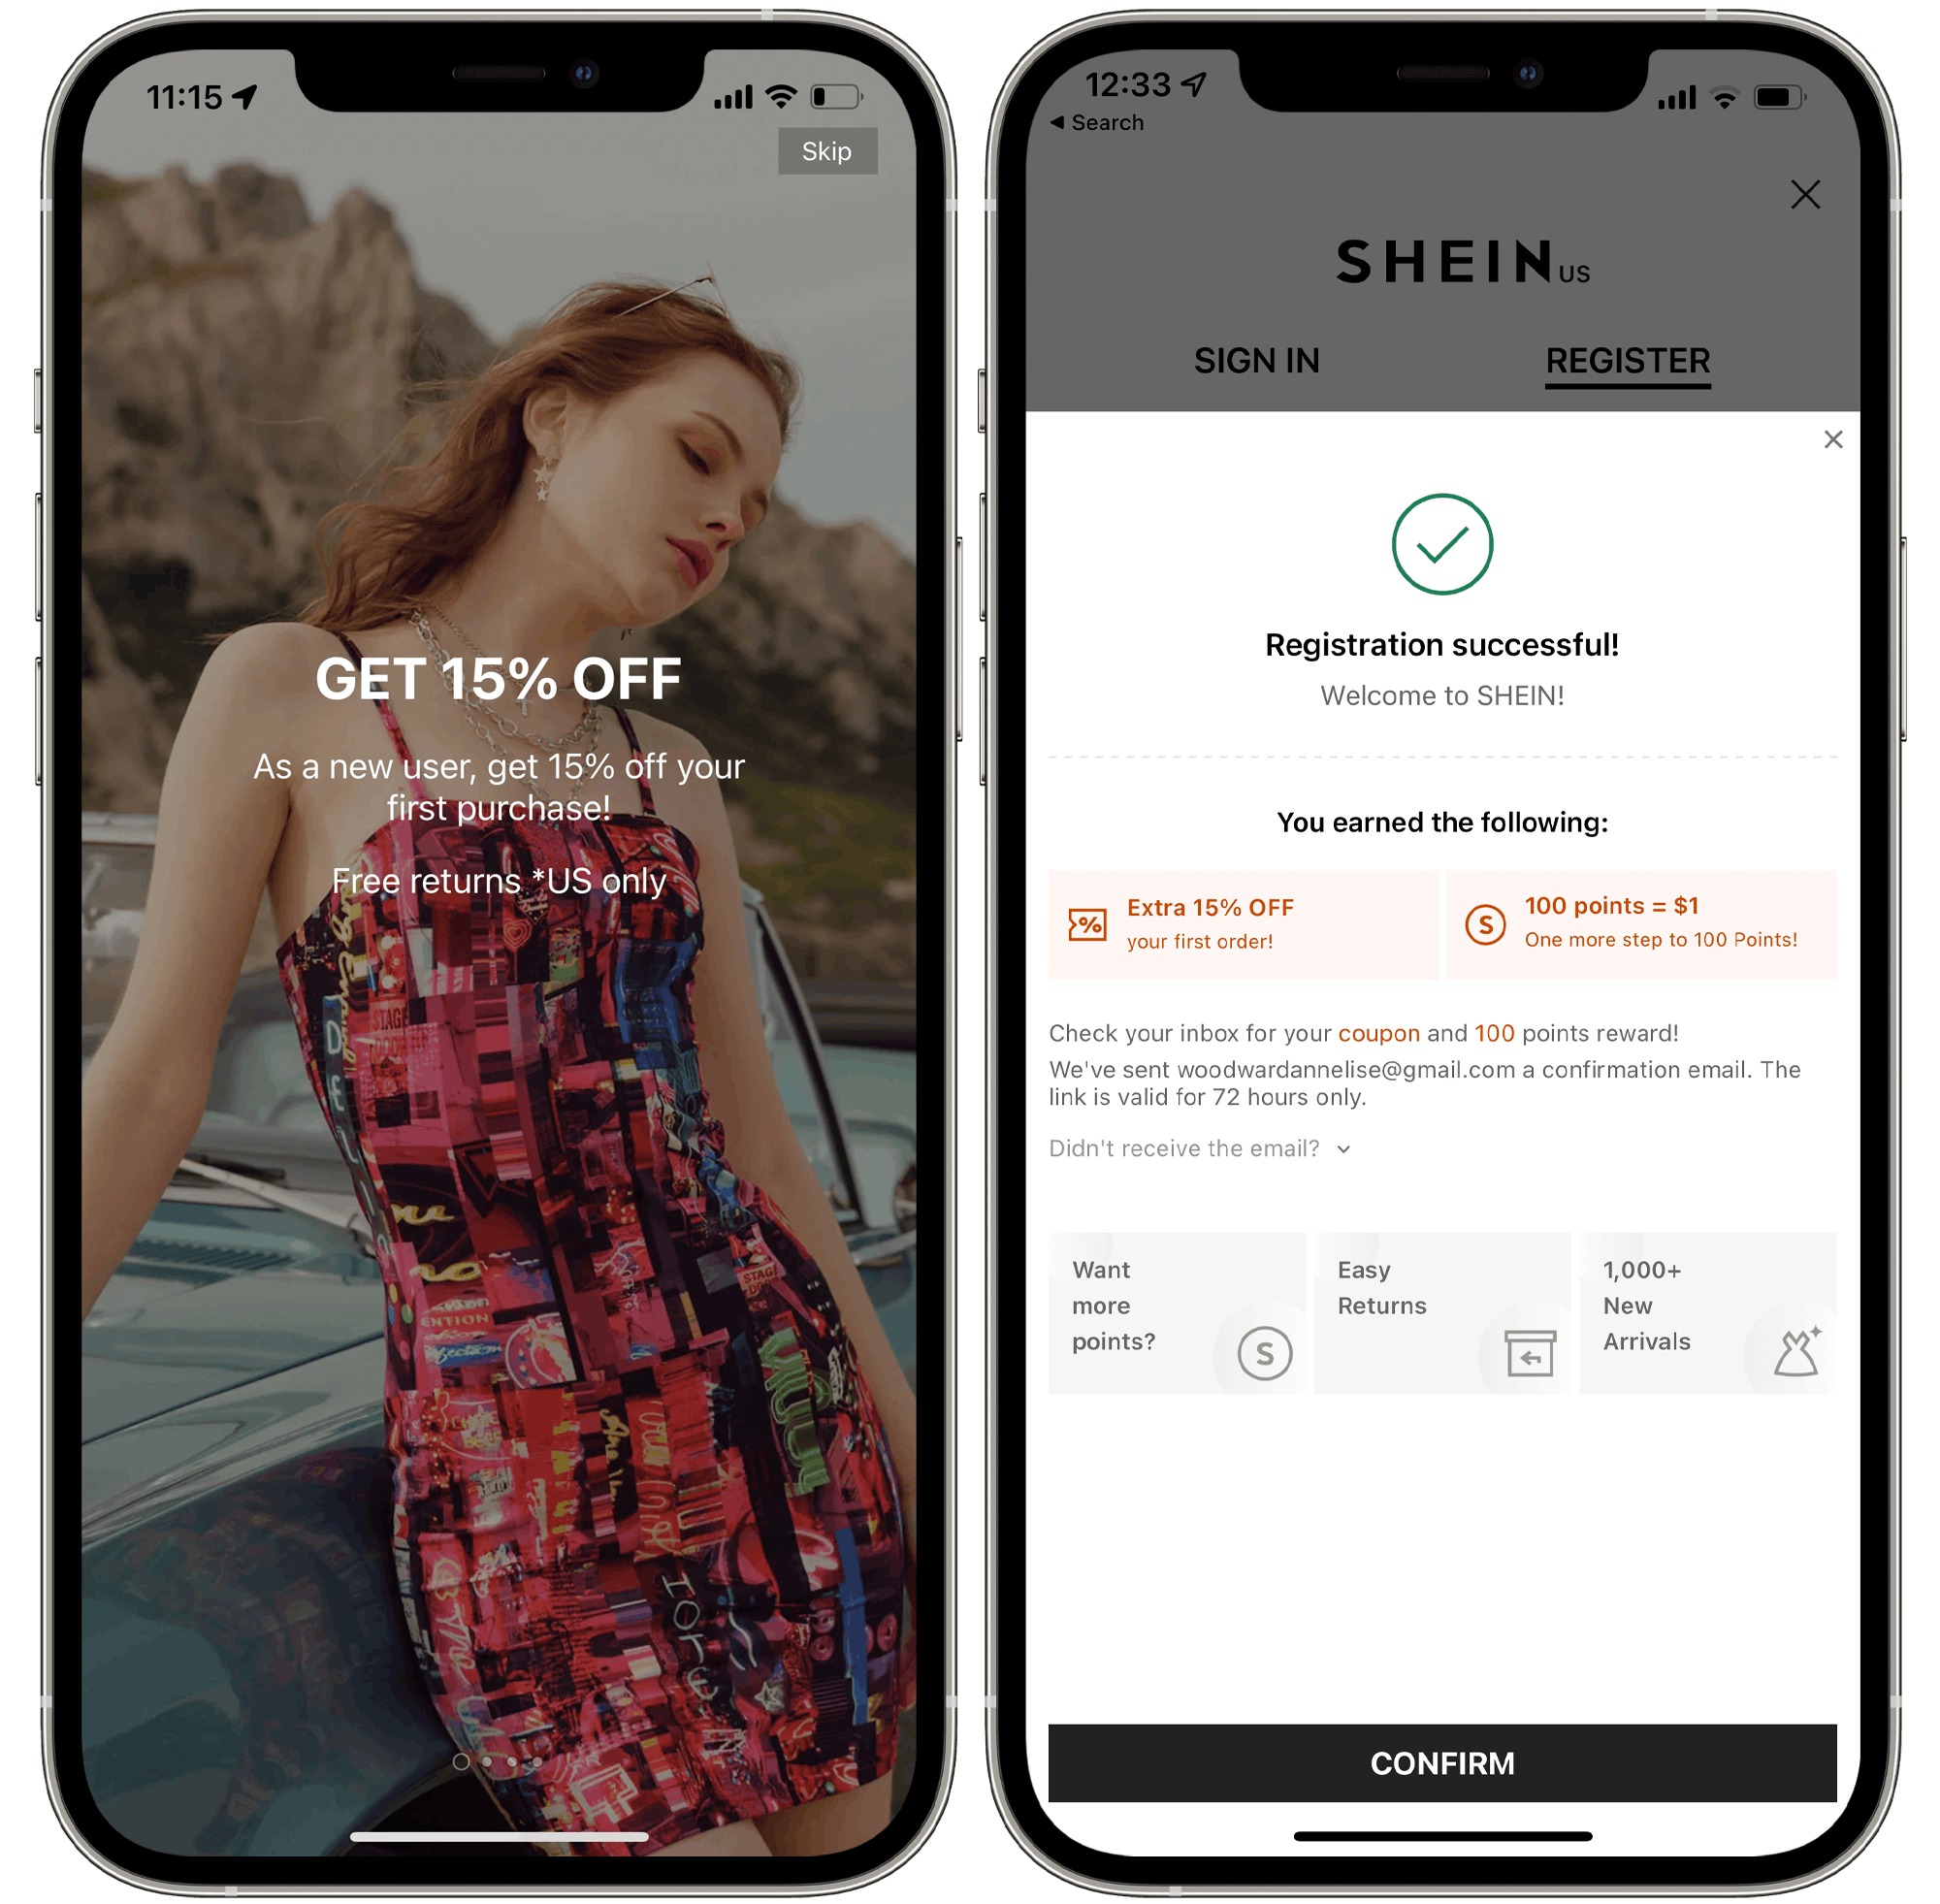 A graphic of two phones, one showing a 15% off offer for new SHEIN users and the other showing a "Registration Successful" page within the SHEIN app.